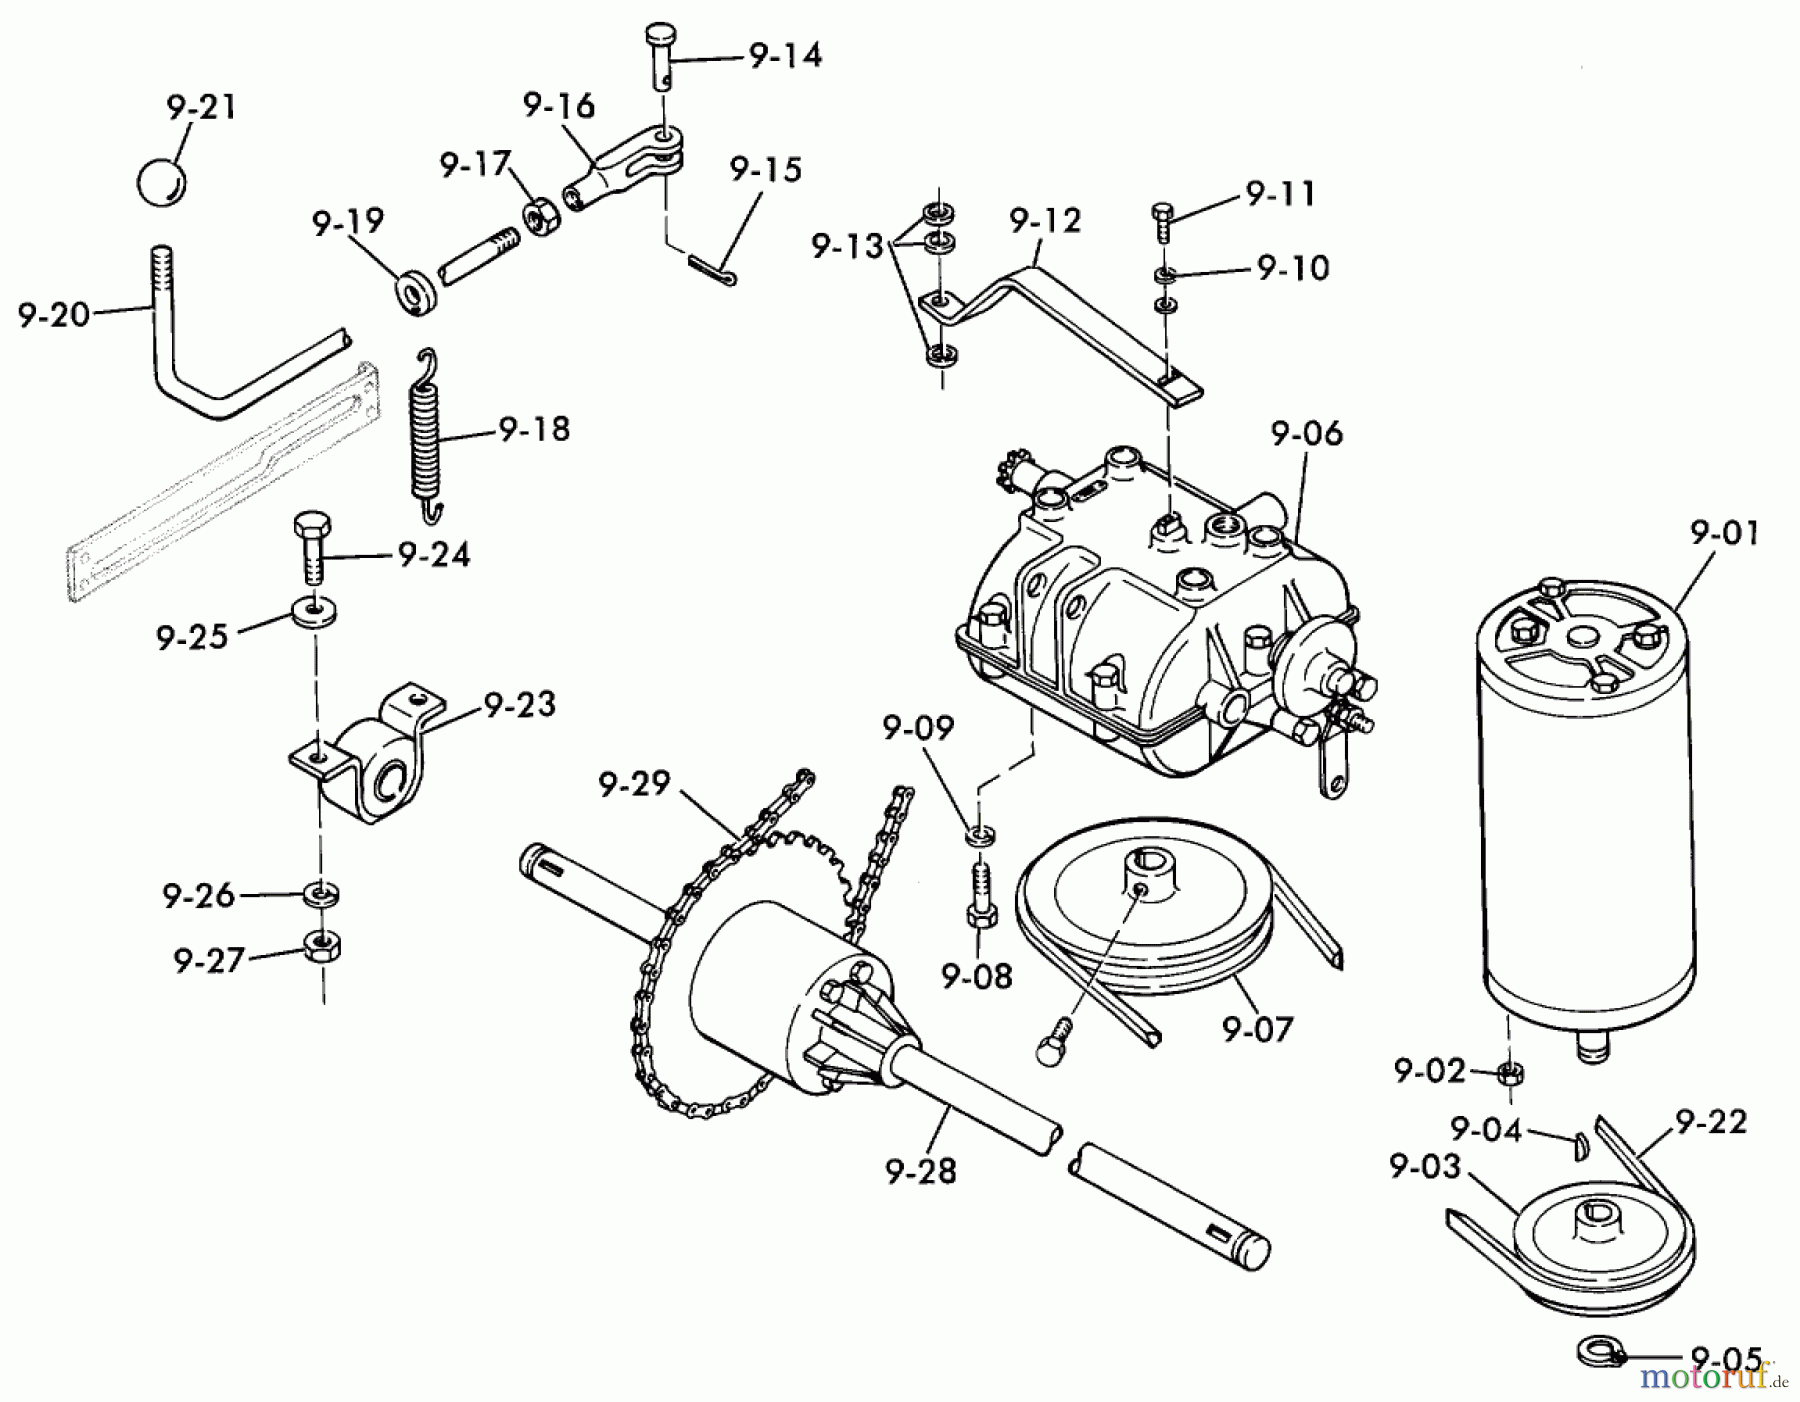  Toro Neu Mowers, Lawn & Garden Tractor Seite 1 3-6000 (A-65) - Toro A-65 Elec-Trak, 1977 A-65 PARTS MANUAL E9.000 MOTOR, TRANSMISSION AND DRIVE SYSTEM (FIG. 9)